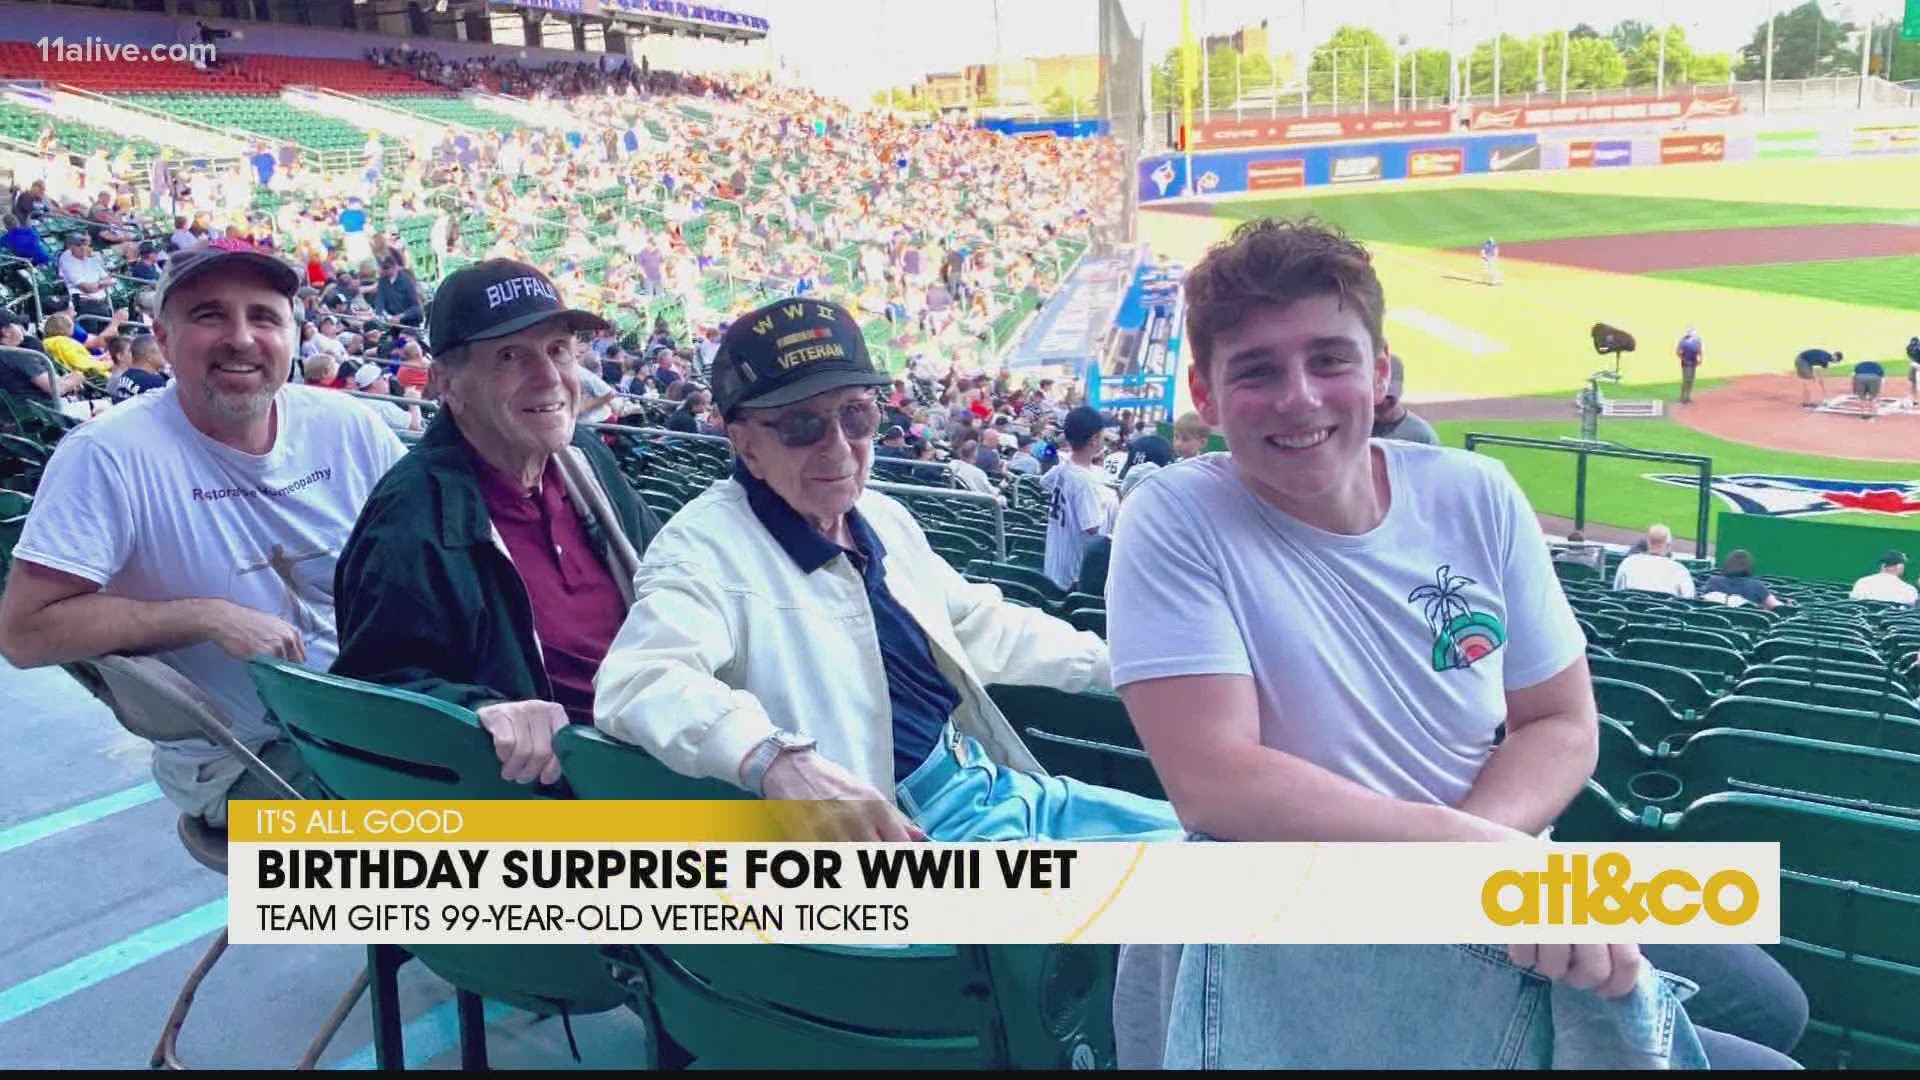 See how this 99-year-old veteran and lifelong Yankees fan was gifted a special baseball surprise to share with his grandsons.